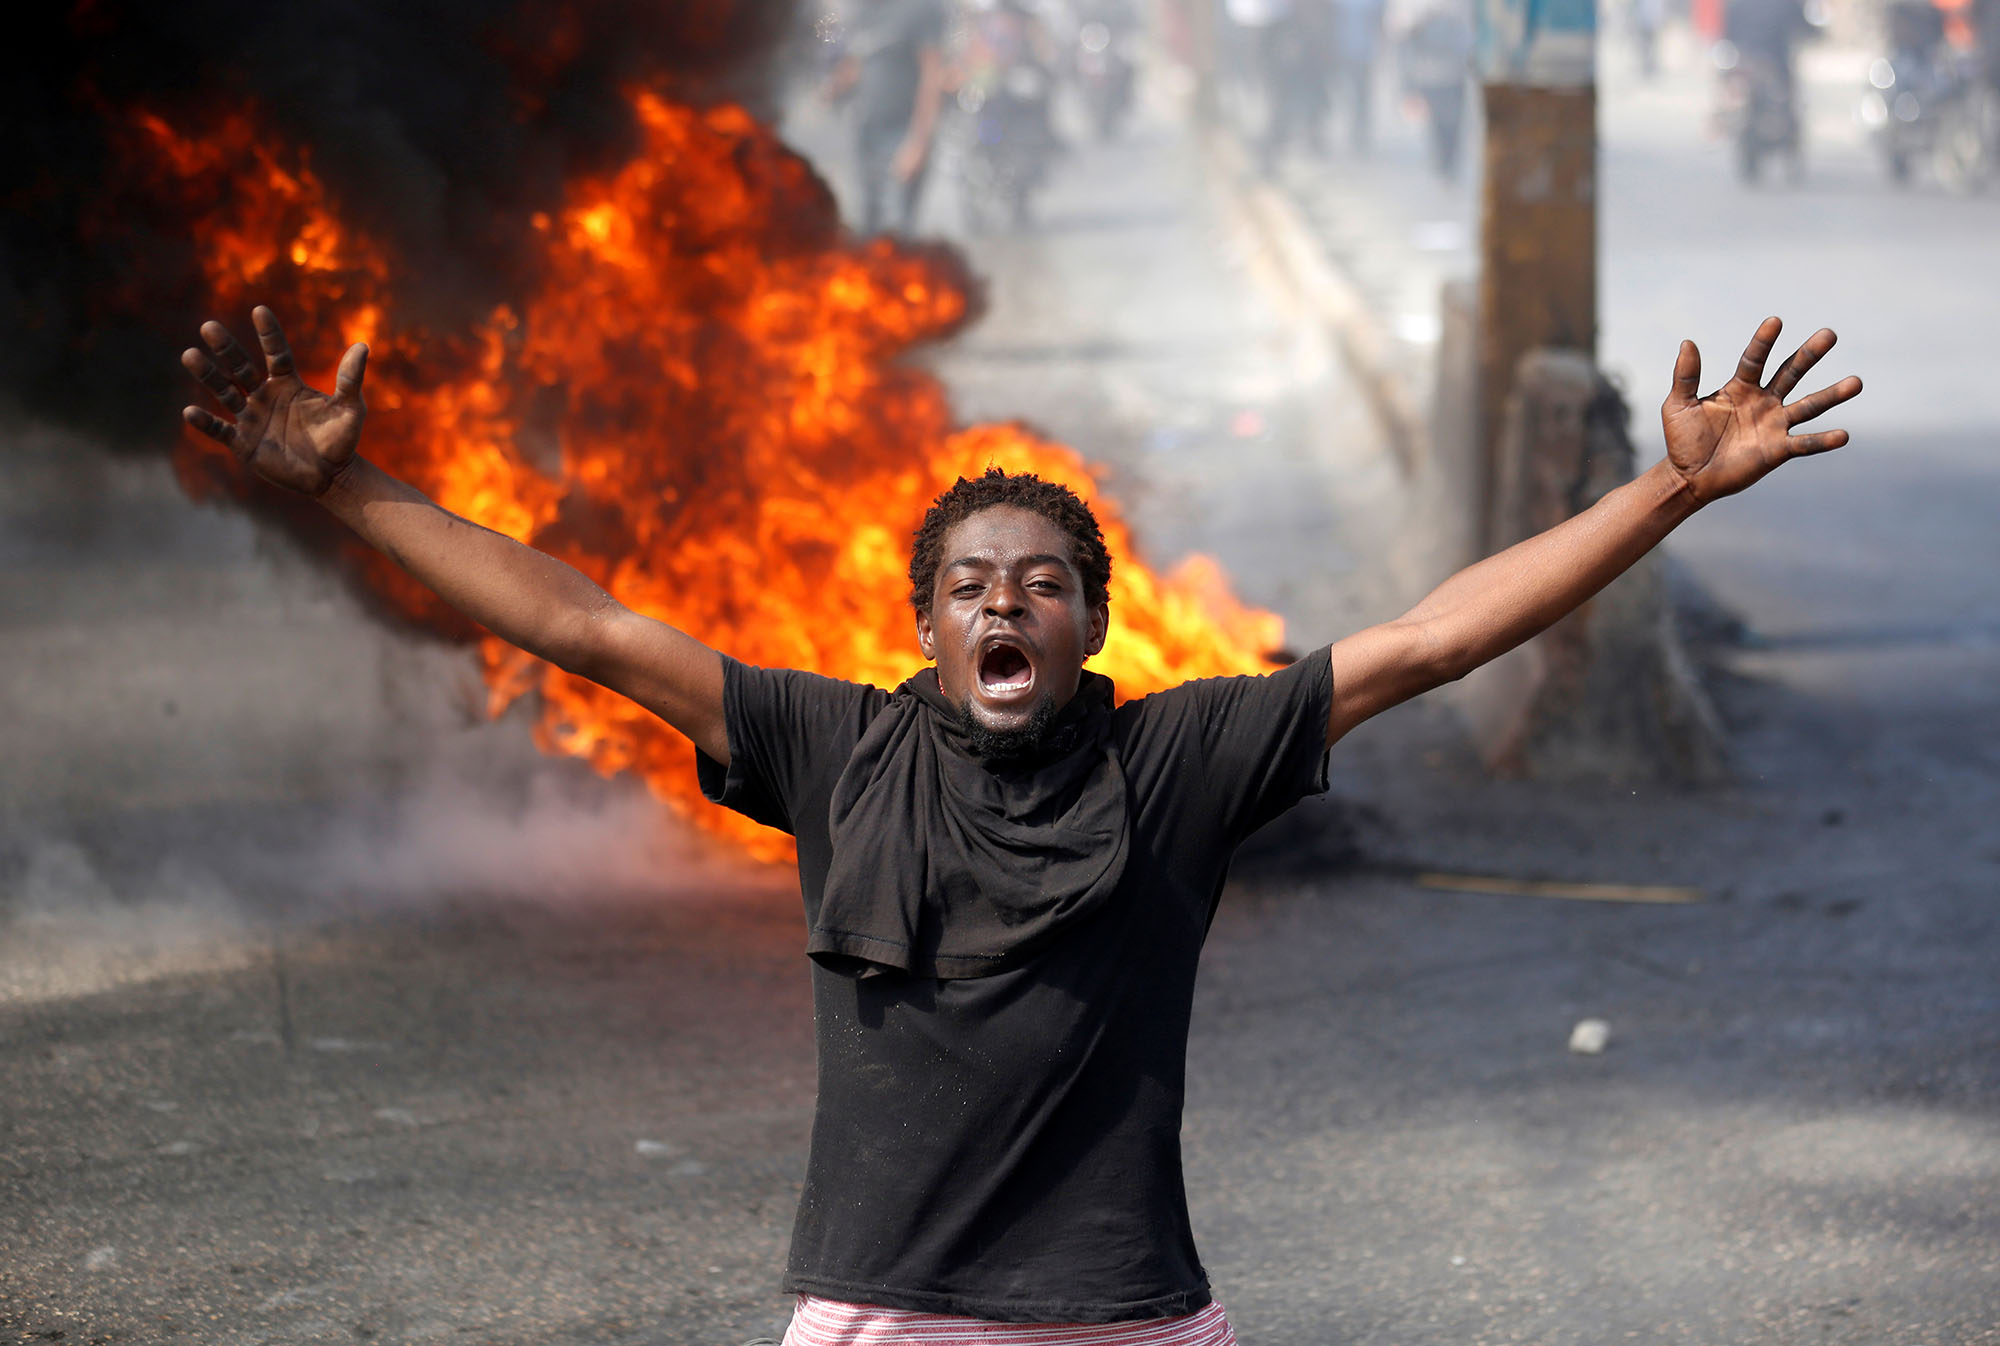 Haiti's Protests: Images Reflect Latest Power Struggle | Council on Foreign Relations